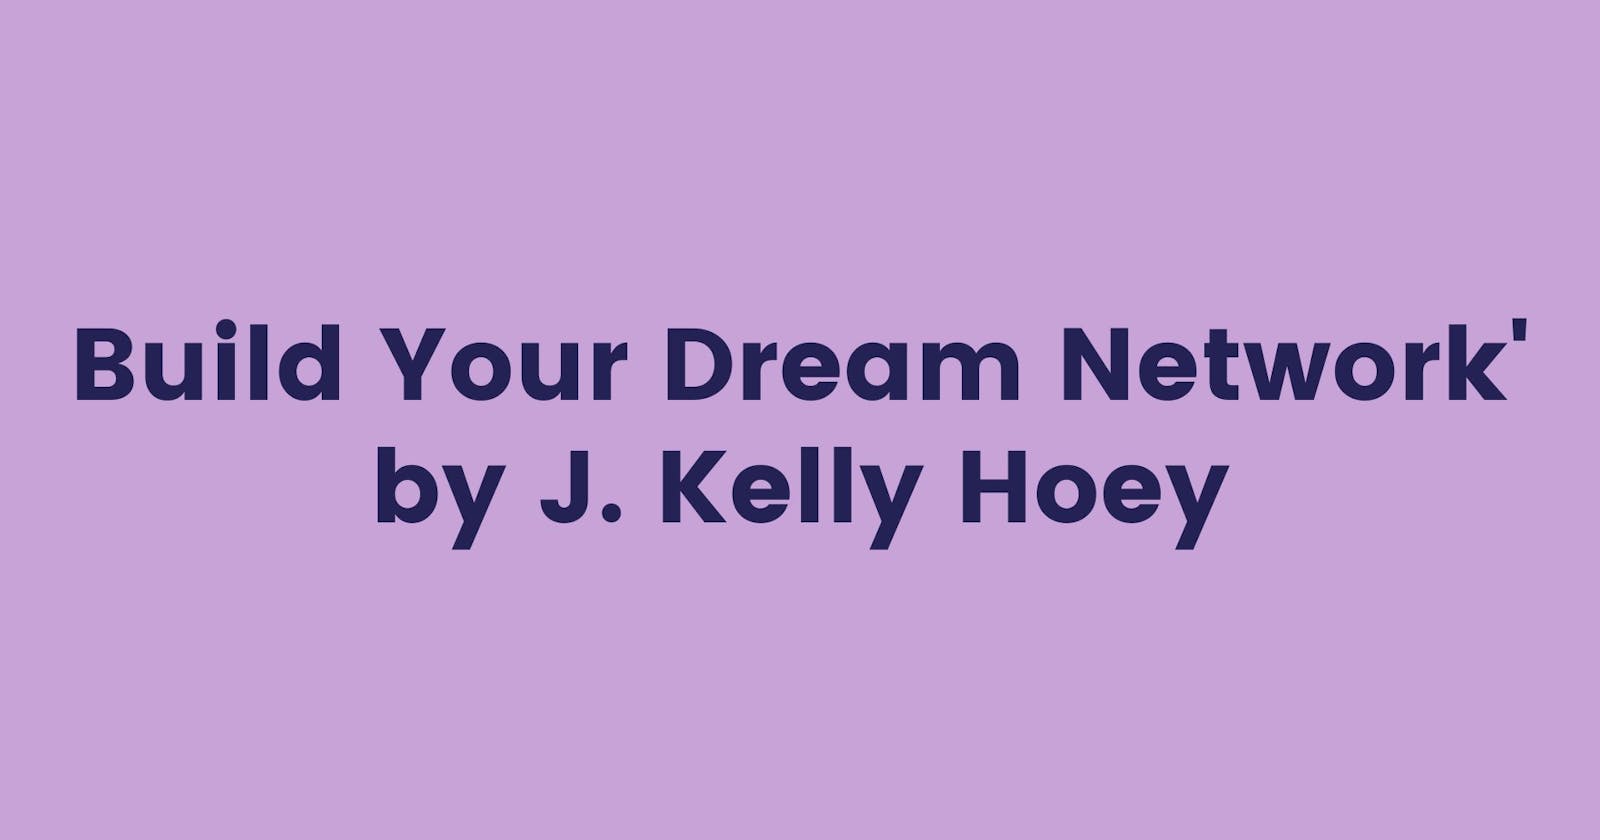 20 Networking Nuggets from 'Build Your Dream Network' by J. Kelly Hoey